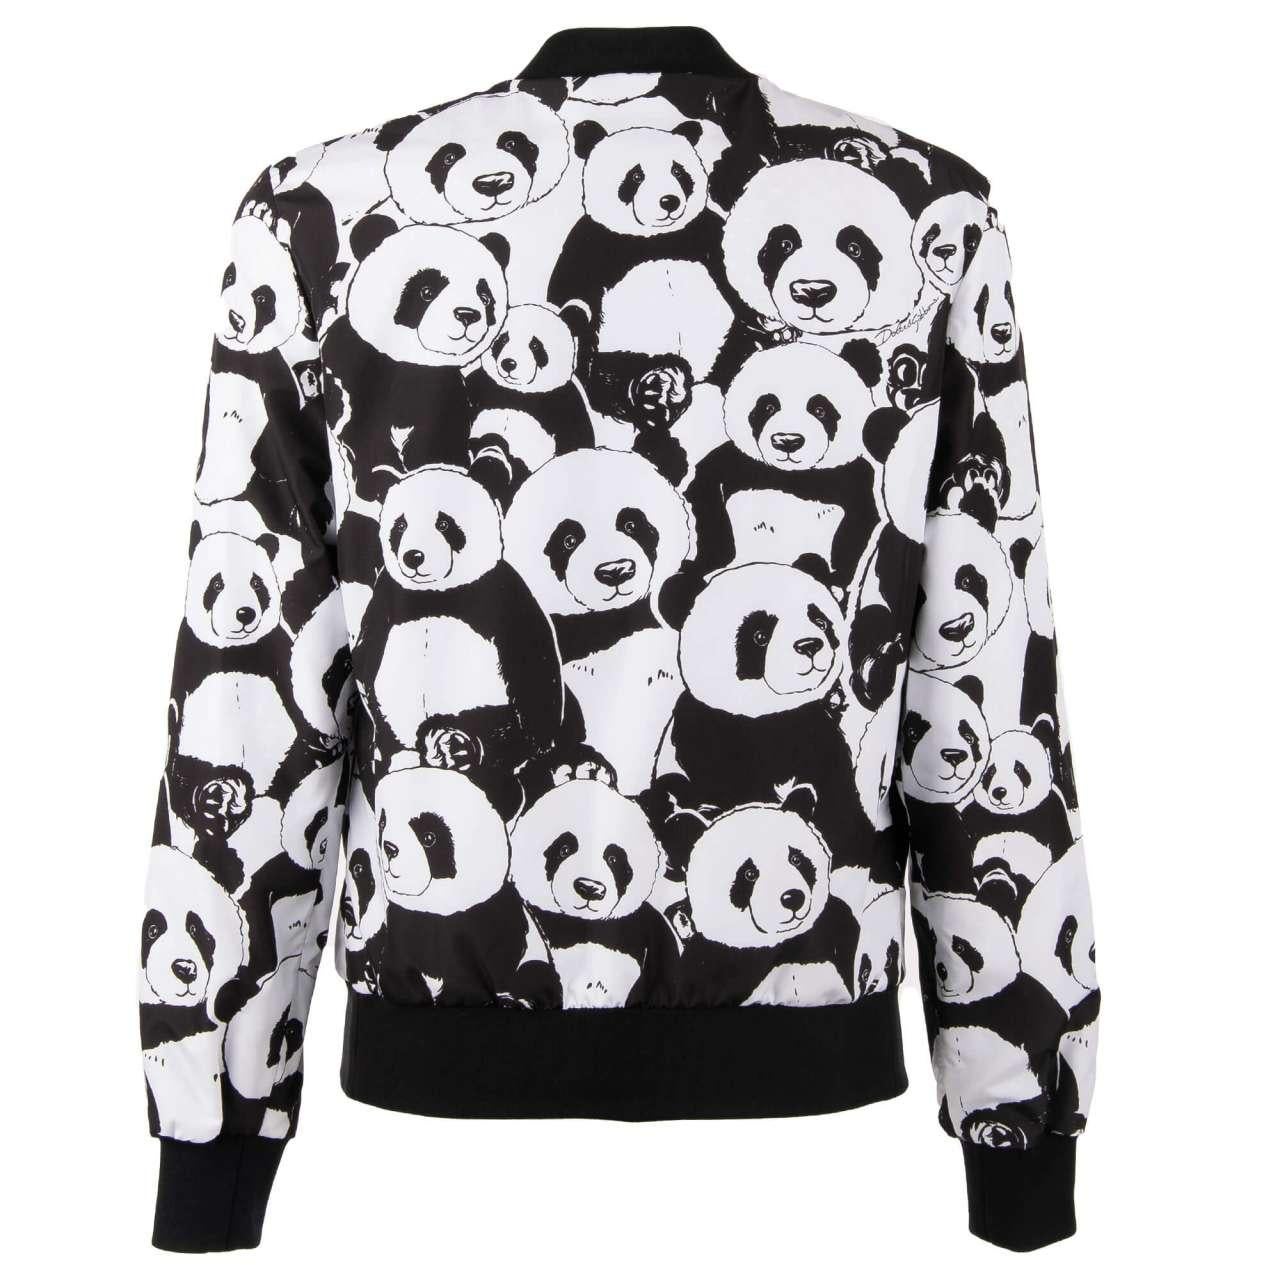 Dolce & Gabbana - Panda Printed Bomber Jacket with Logo Black White 46 In Excellent Condition For Sale In Erkrath, DE